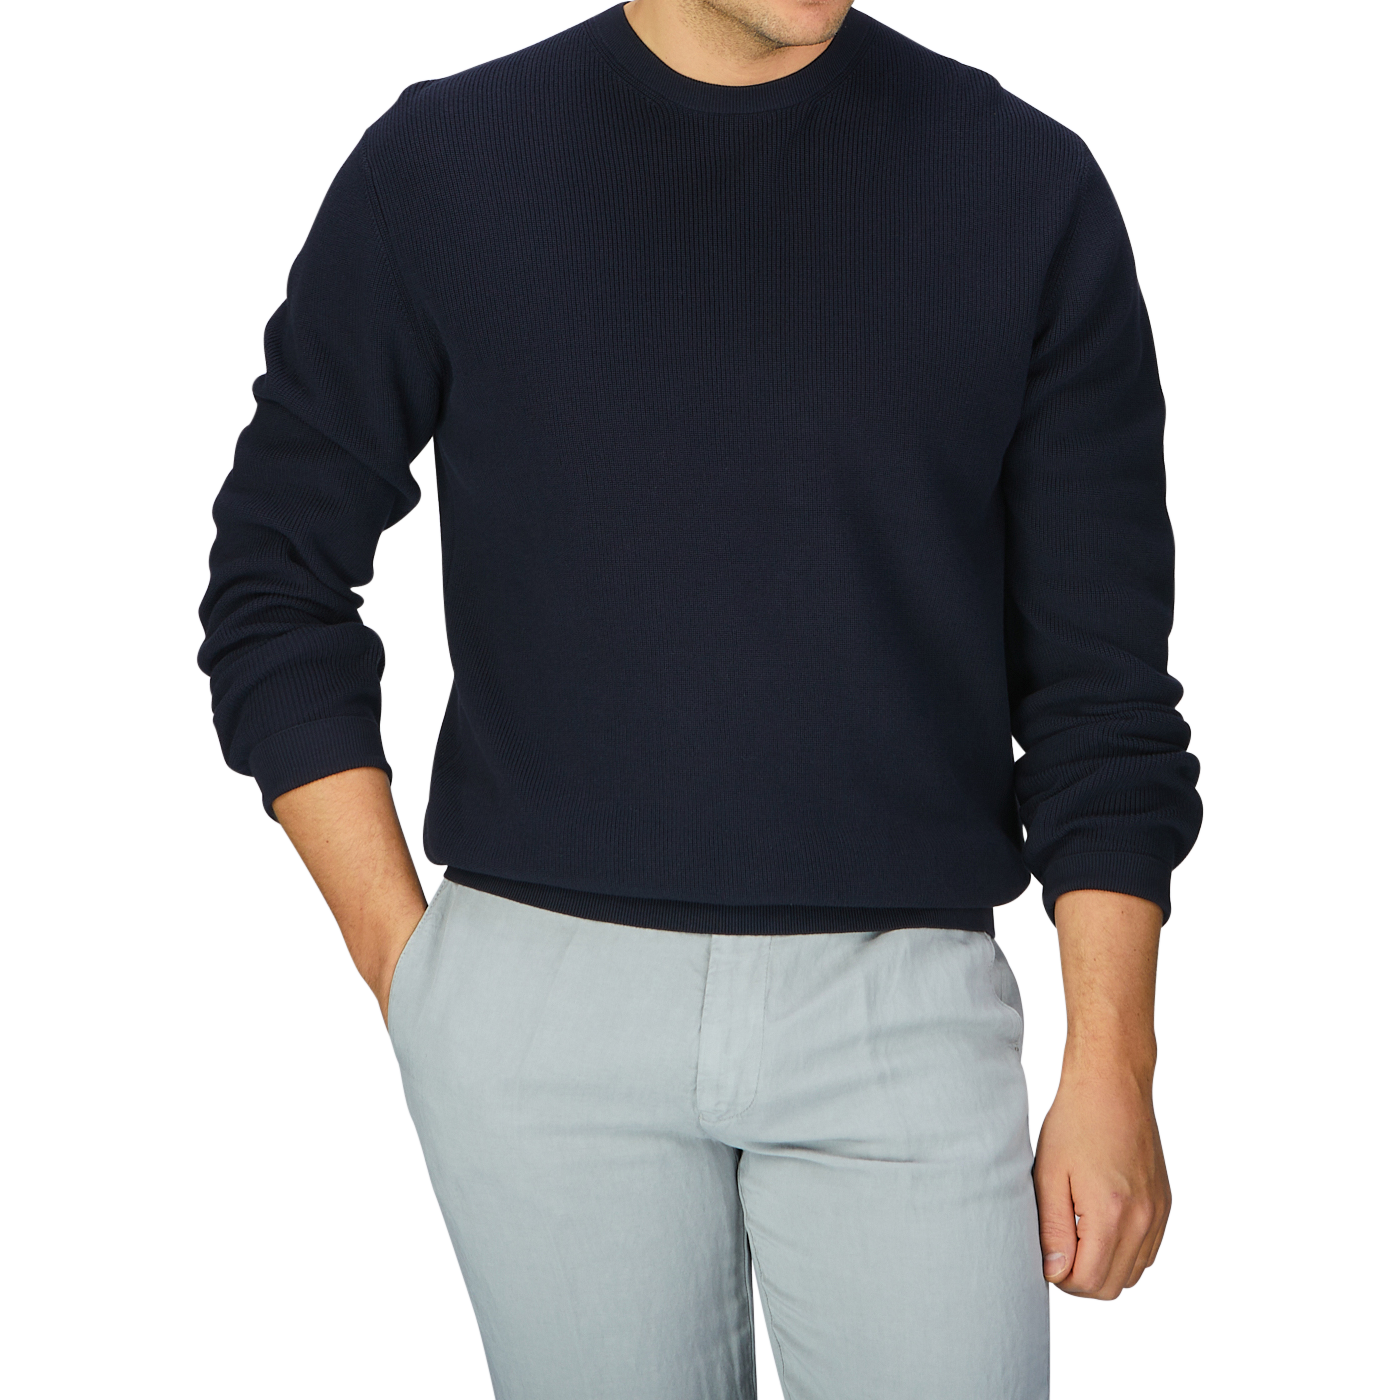 A man wearing an Aspesi navy blue knitted cotton sweater and grey pants.